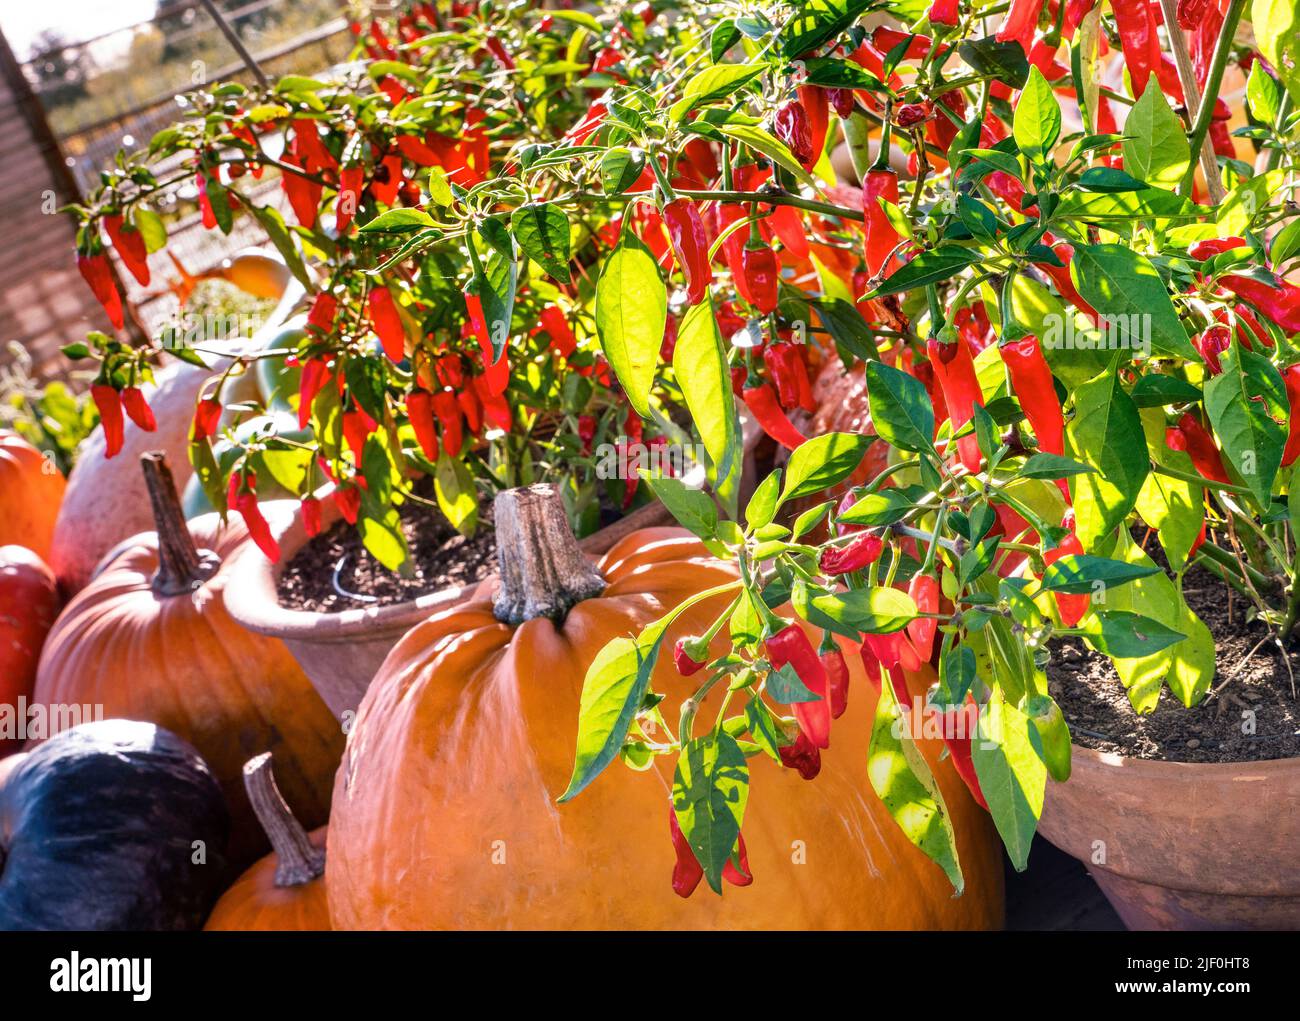 CHILLI Red Apache vegetable chilli peppers (capsicum annum) potted in terracotta pot with harvest collection of squash and pumpkins behind forming attractive produce display outside organic farm shop UK Stock Photo